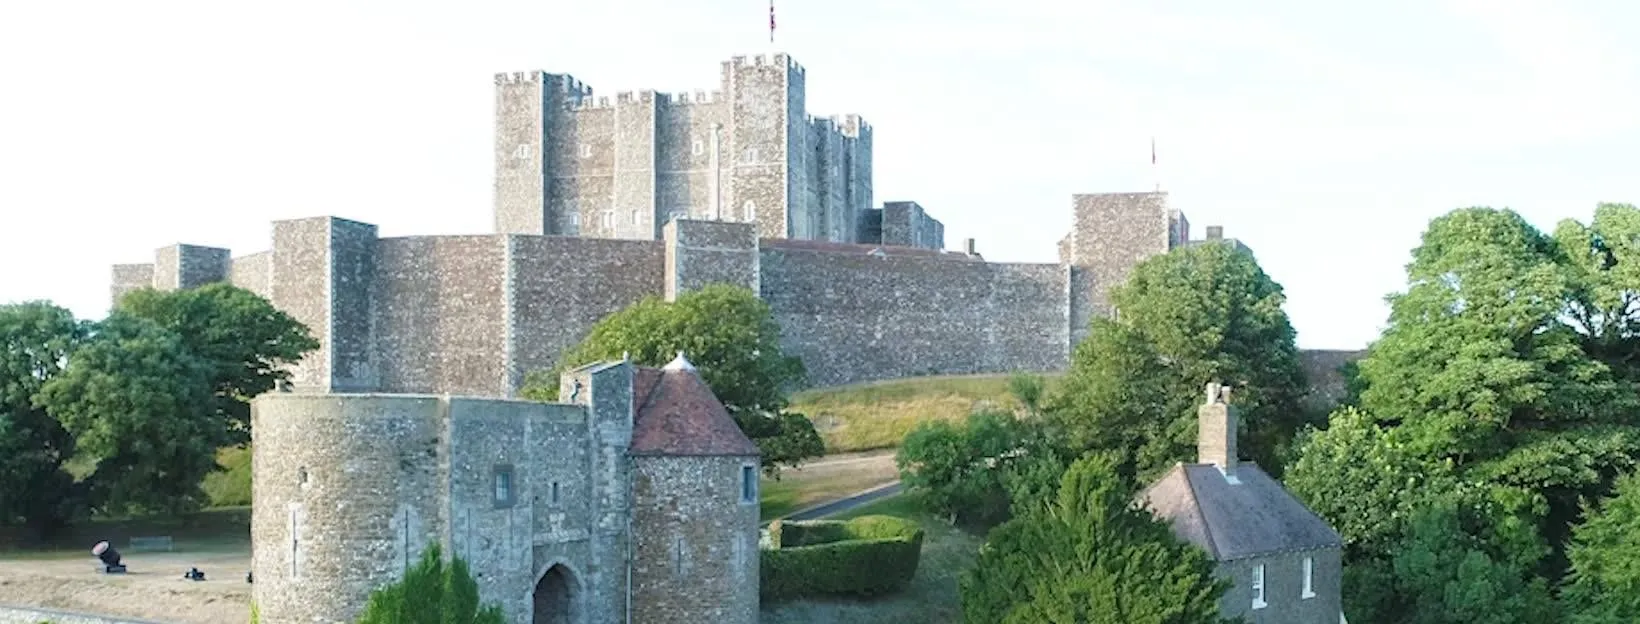 The country's most popular coastline awaits you in Canterbury. Buy Dover Castle tour tickets and take a trip now.